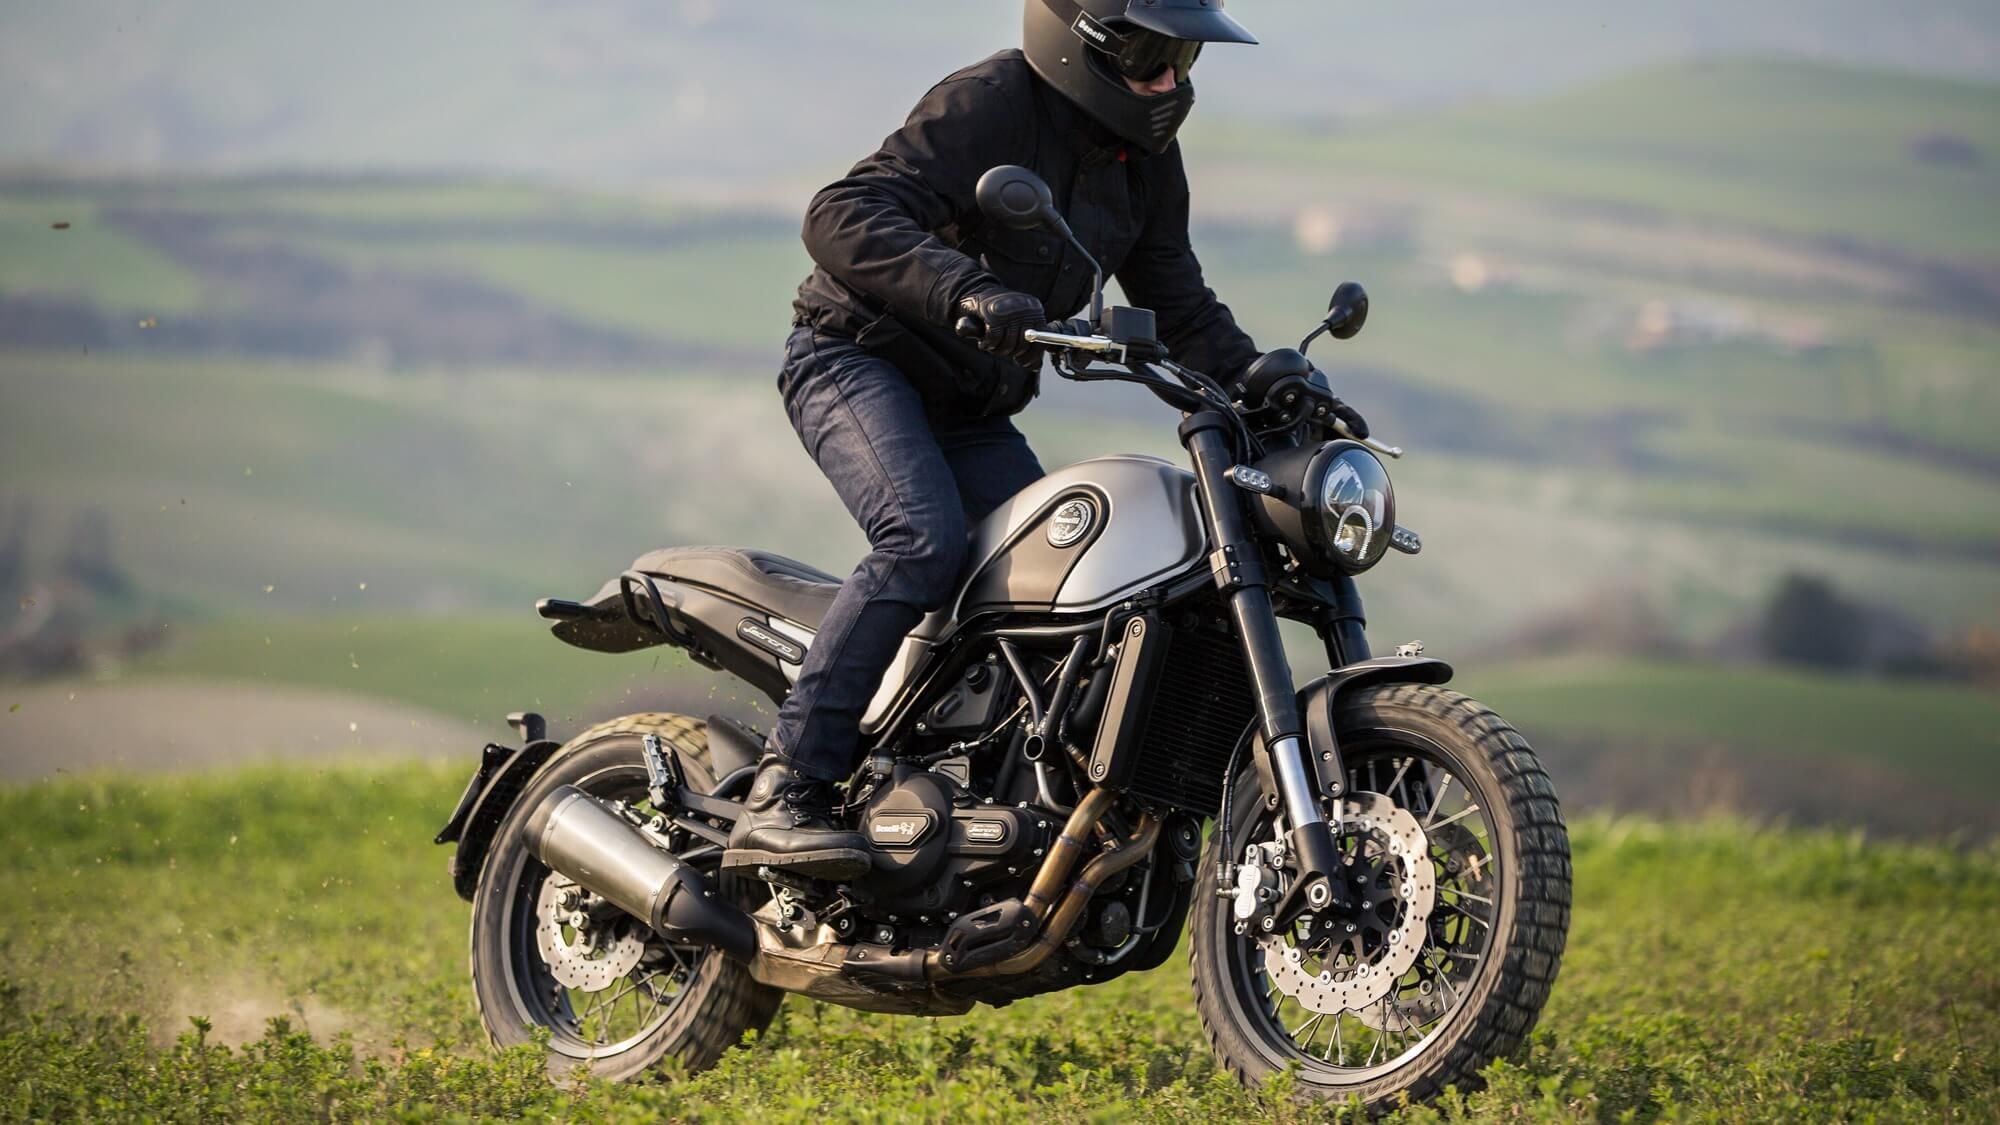 10 Things We Love About The Benelli Leoncino 500 Trail